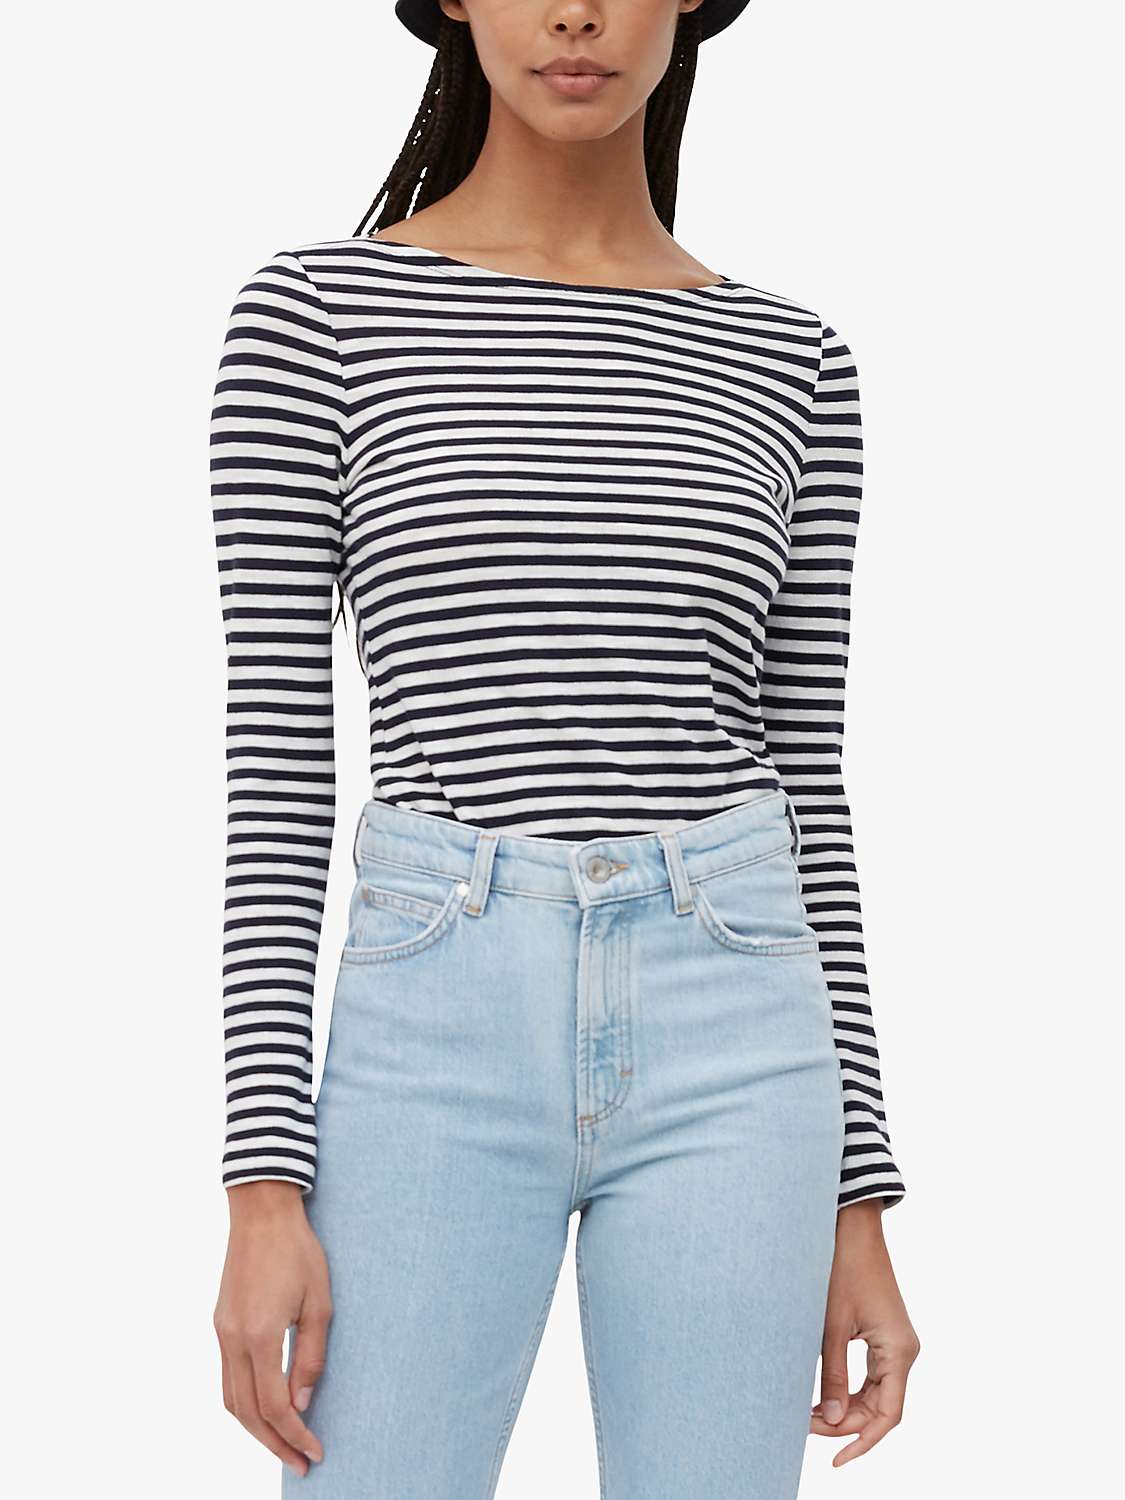 Buy Marc O'Polo Striped Boat Neck Cotton T-Shirt Online at johnlewis.com